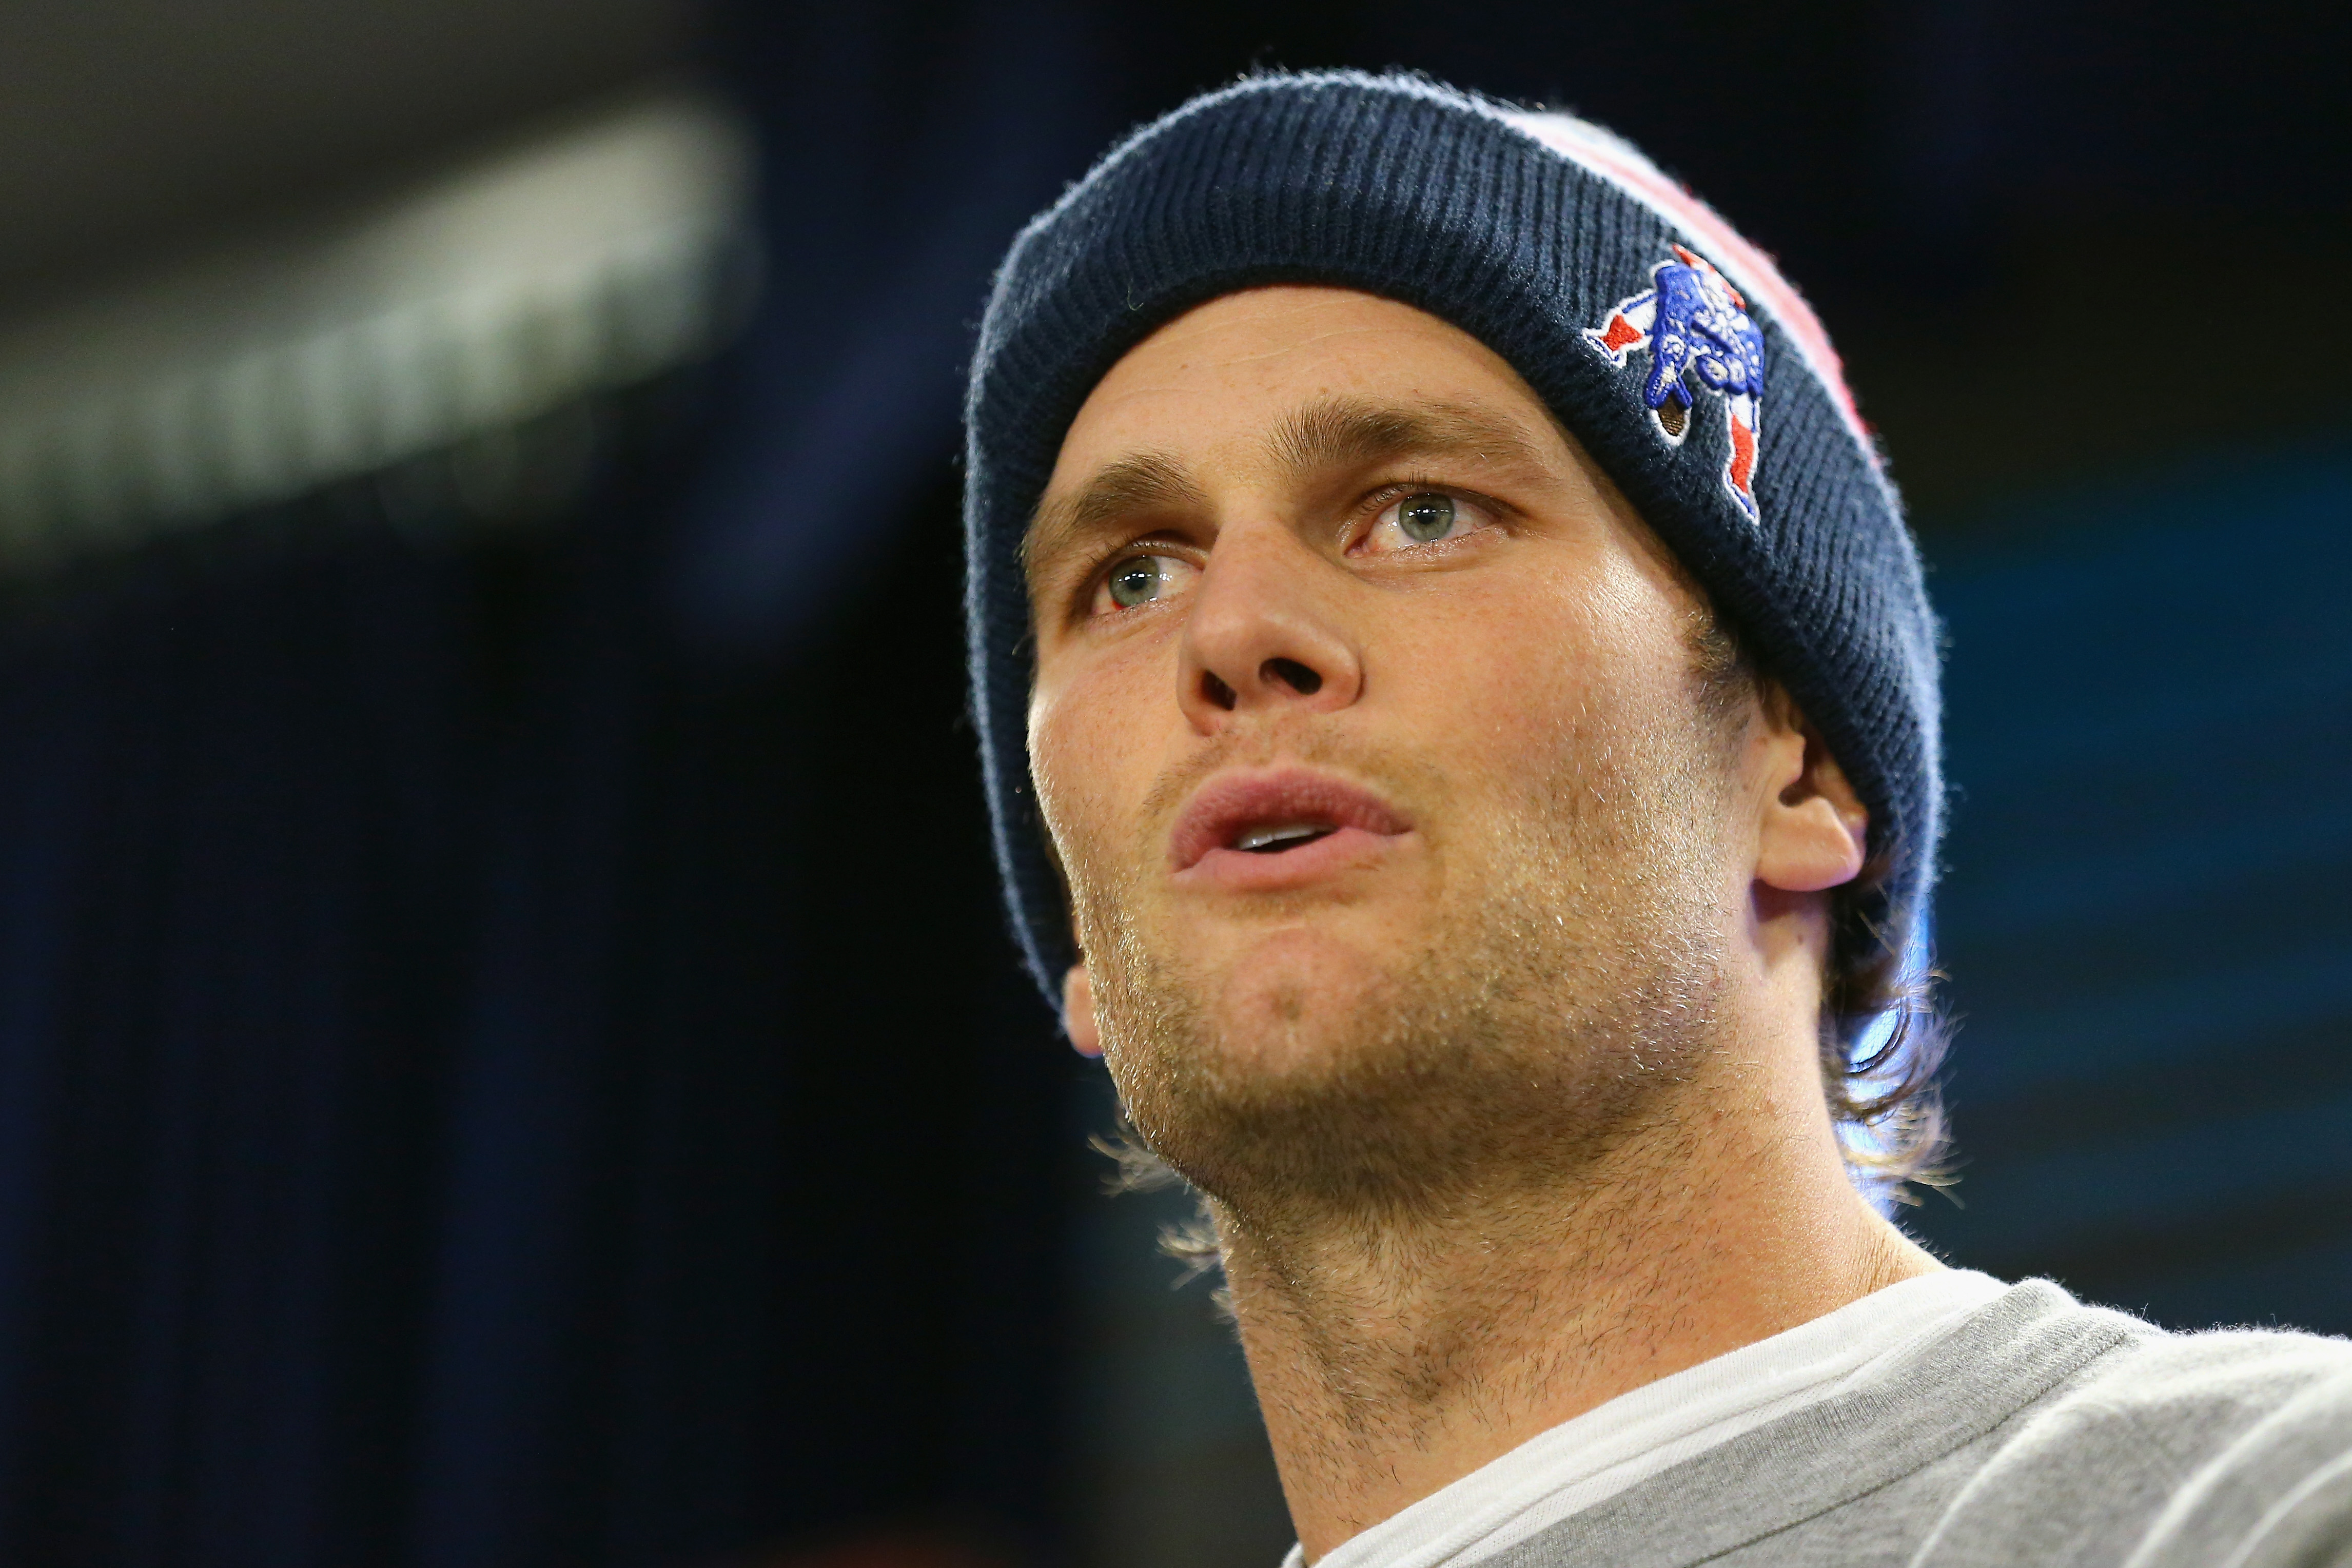 New England Patriots quarterback Tom Brady talks to the media during a press conference to address the under inflation of footballs used in the AFC championship game at Gillette Stadium on Jan. 22, 2015 in Foxboro, Mass. (Maddie Meyer—Getty Images)